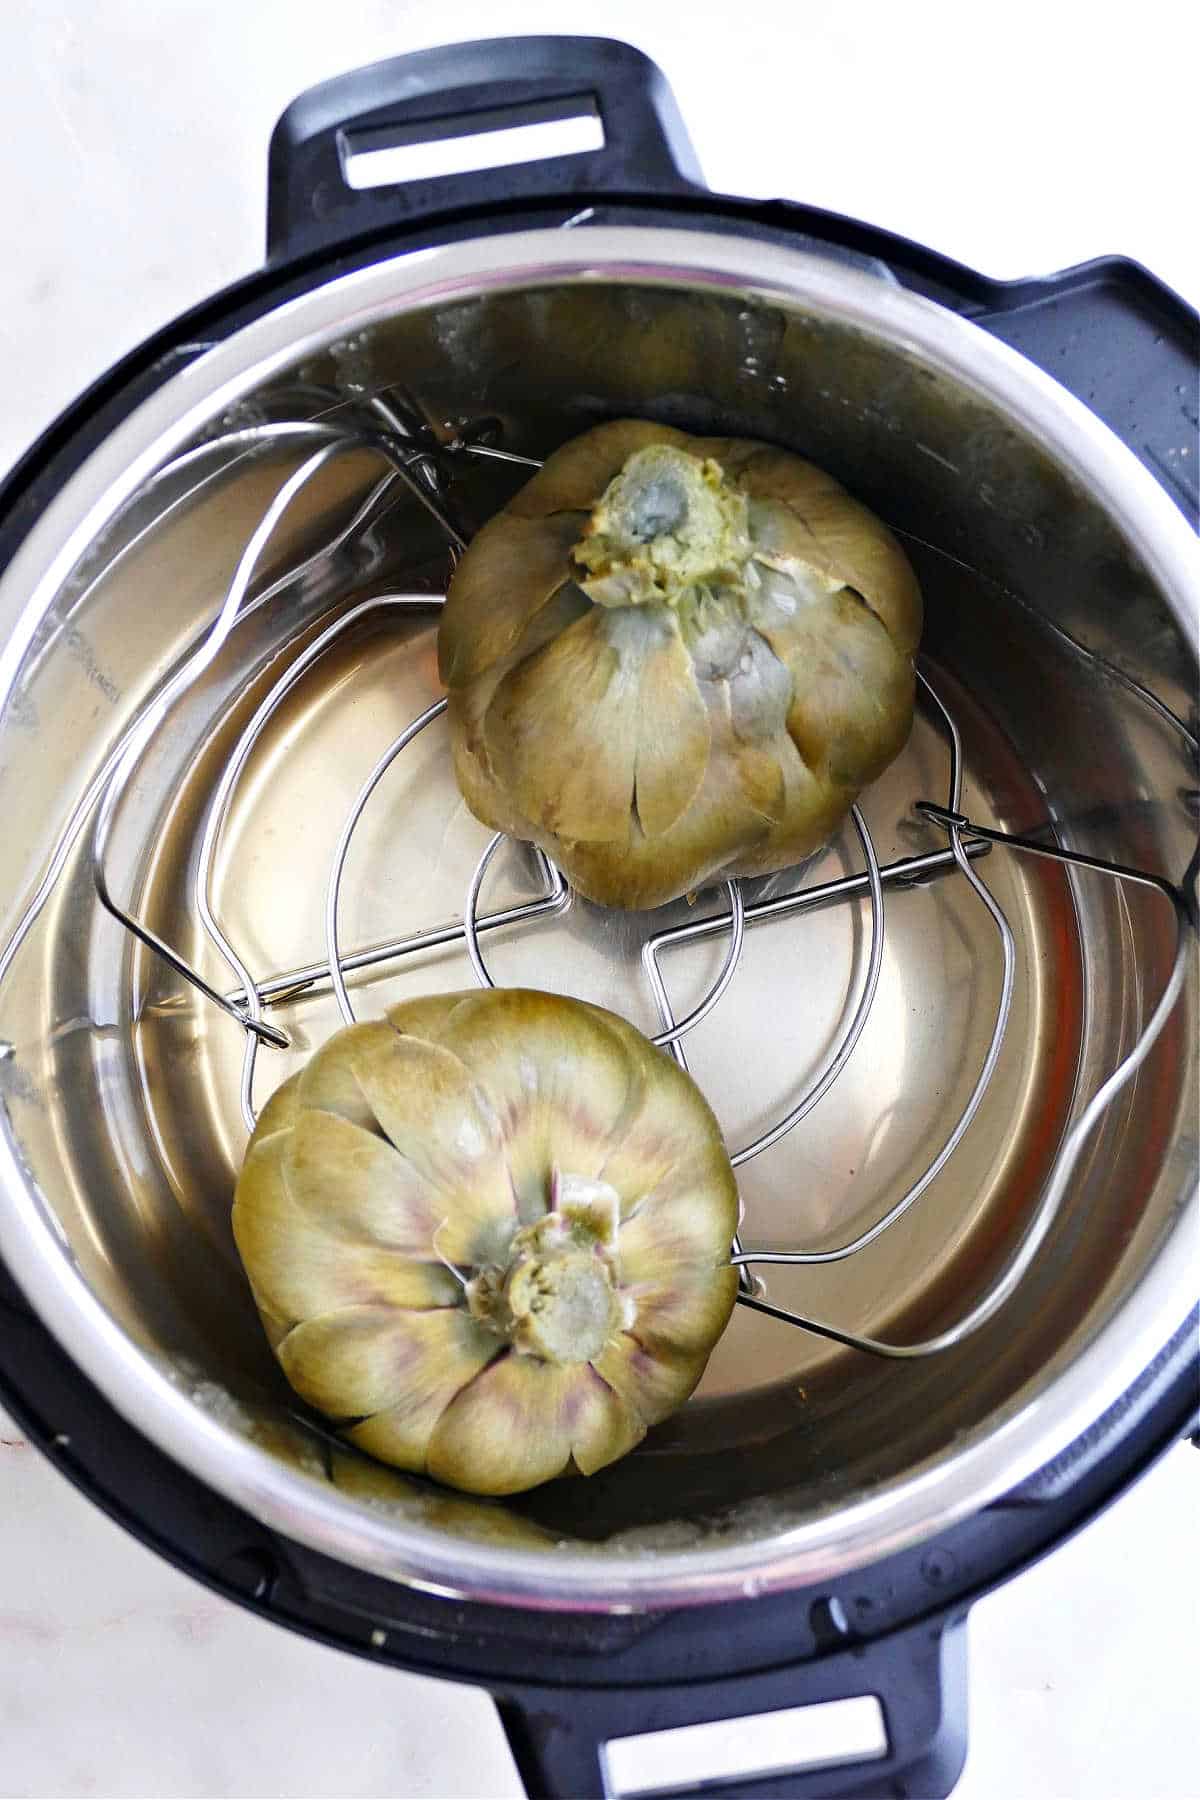 upside down cooked artichokes sitting in an instant pot